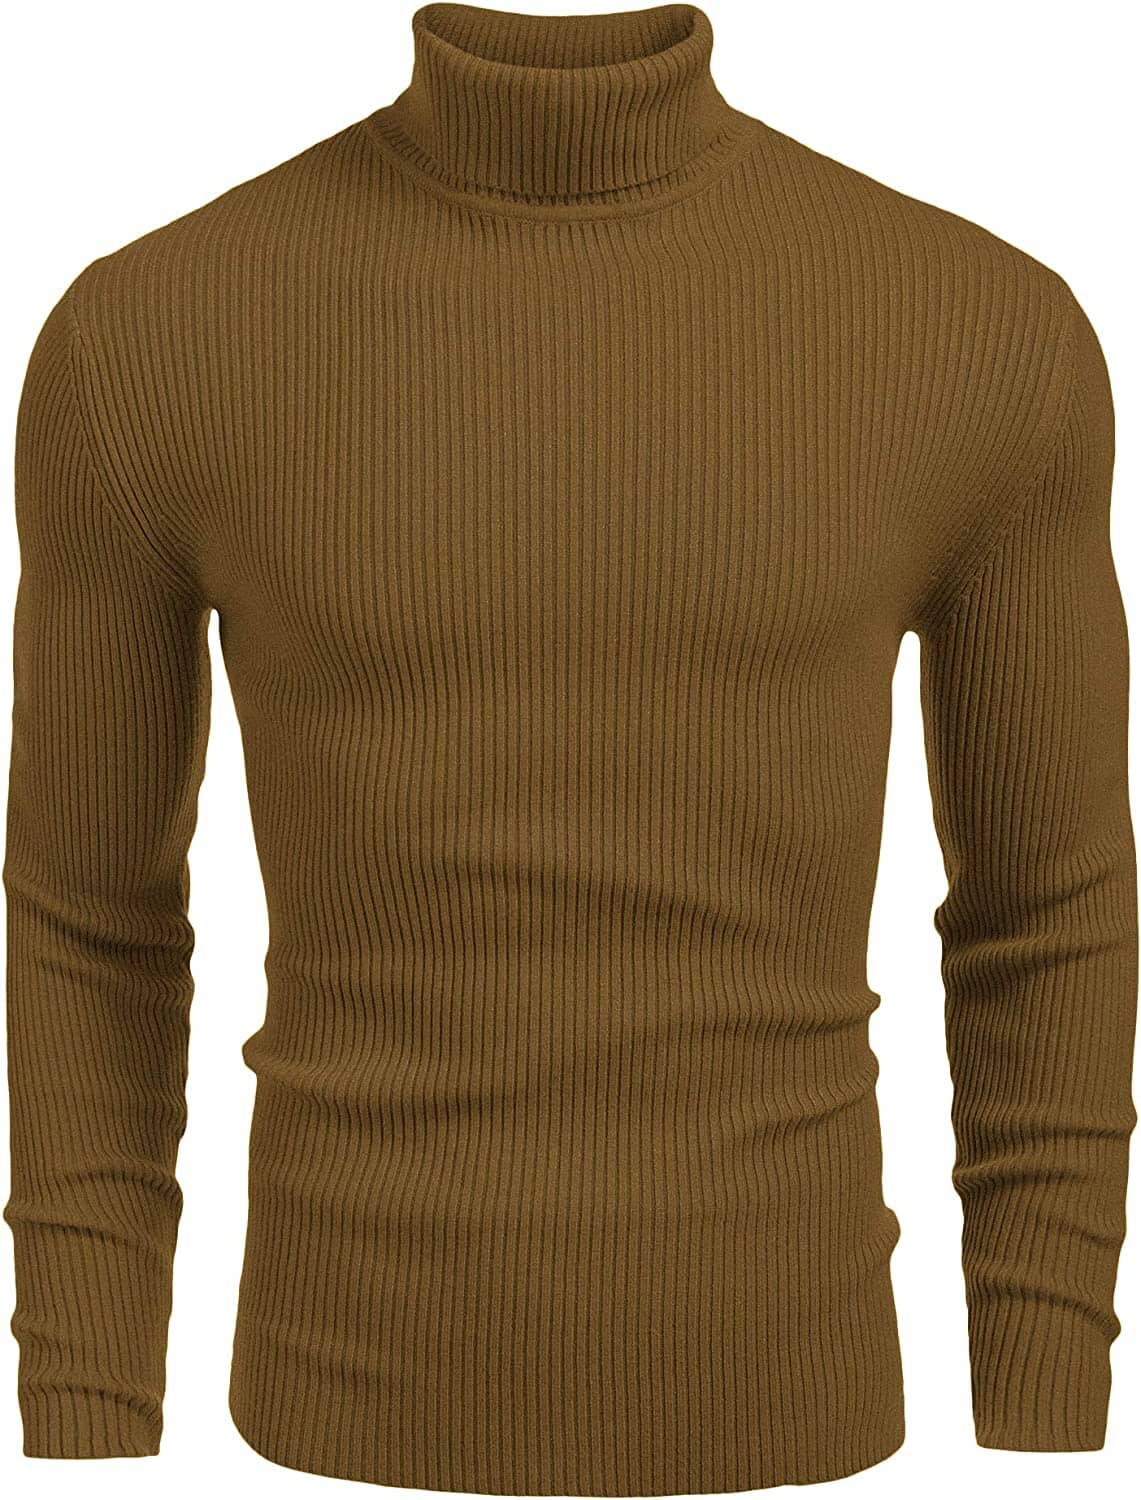 Ribbed Slim Fit Knitted Pullover Turtleneck Sweater (US Only) Sweaters COOFANDY Store Dark Khaki S 